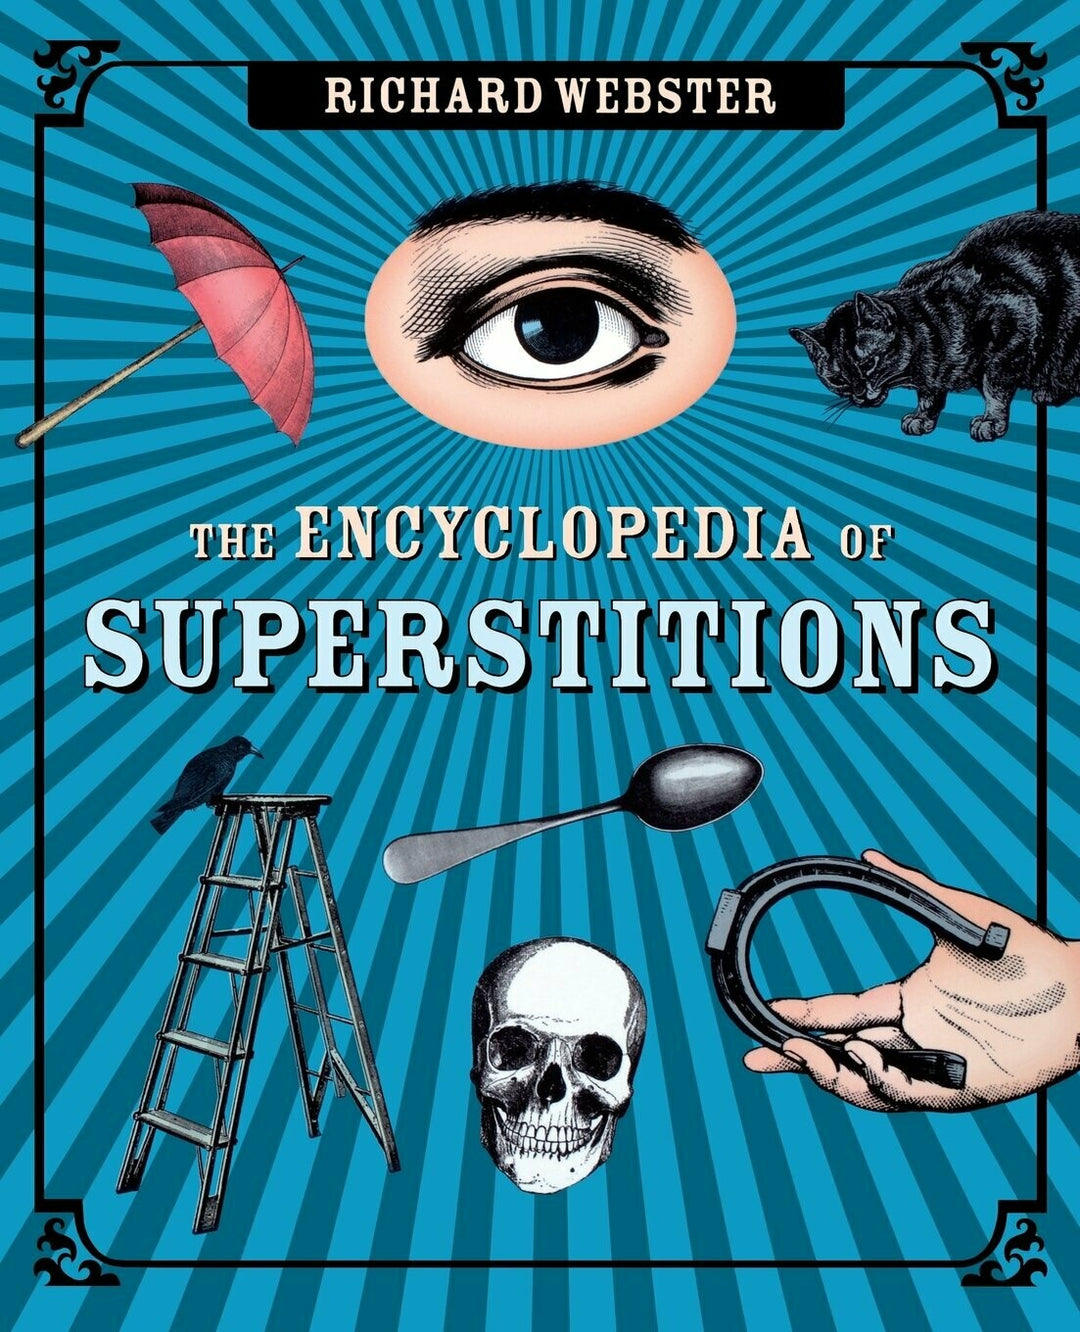 Encyclopedia of Superstitions by Richard Webster